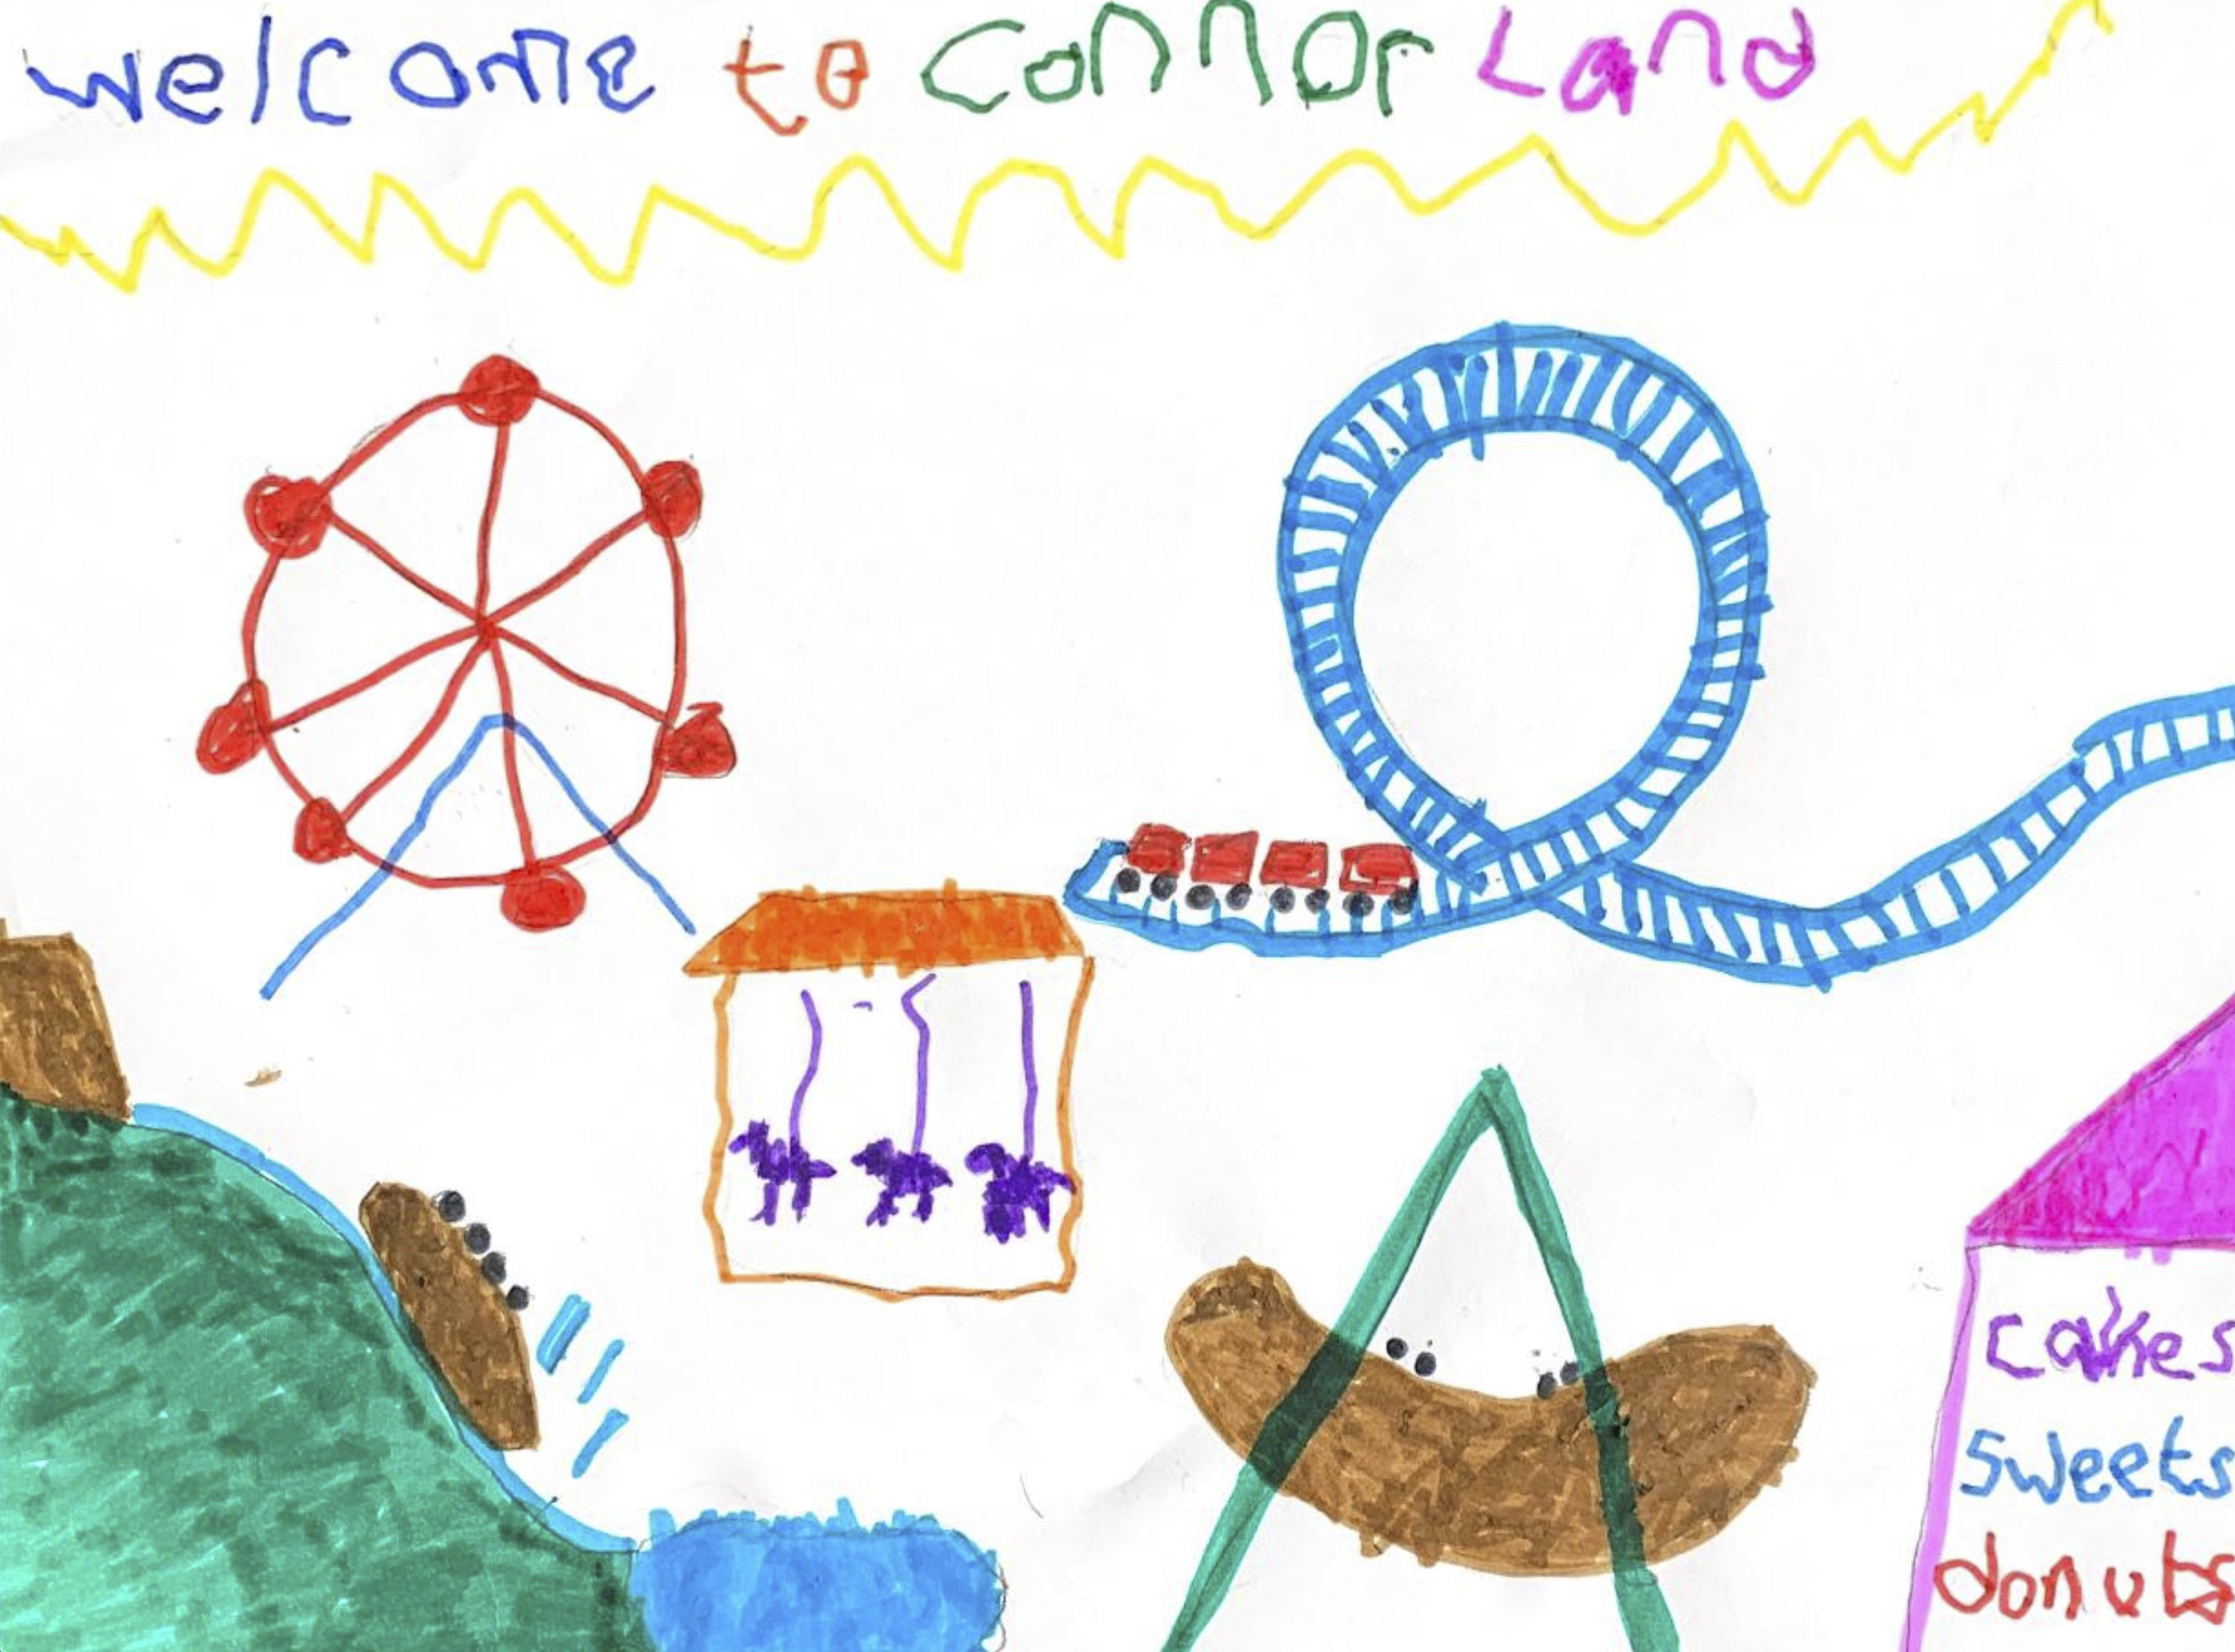 8 Kids Draw Their Own Version Of A Dream Garden, And 3D Artists Take It And Make It Real